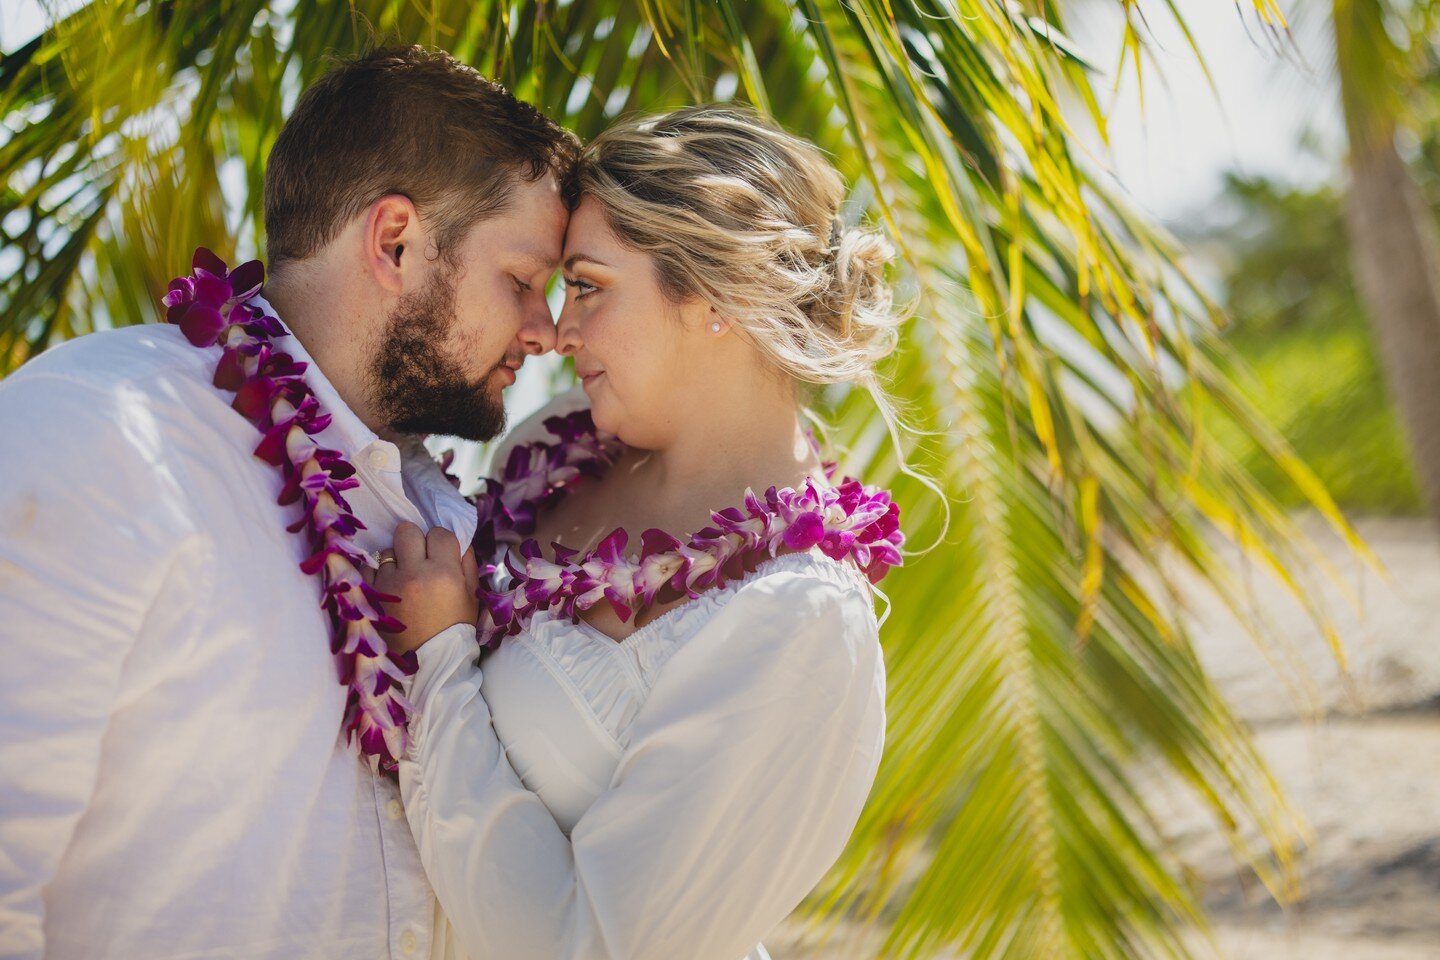 &quot;To be fully seen by somebody, then, and be loved anyhow--this is a human offering that can border on miraculous.&quot;
- Elizabeth Gilbert

#oahuofficiant #hawaiiofficiant #oahuelopement #hawaiielopement #hawaiiwedding #oahuwedding #oahuwedding